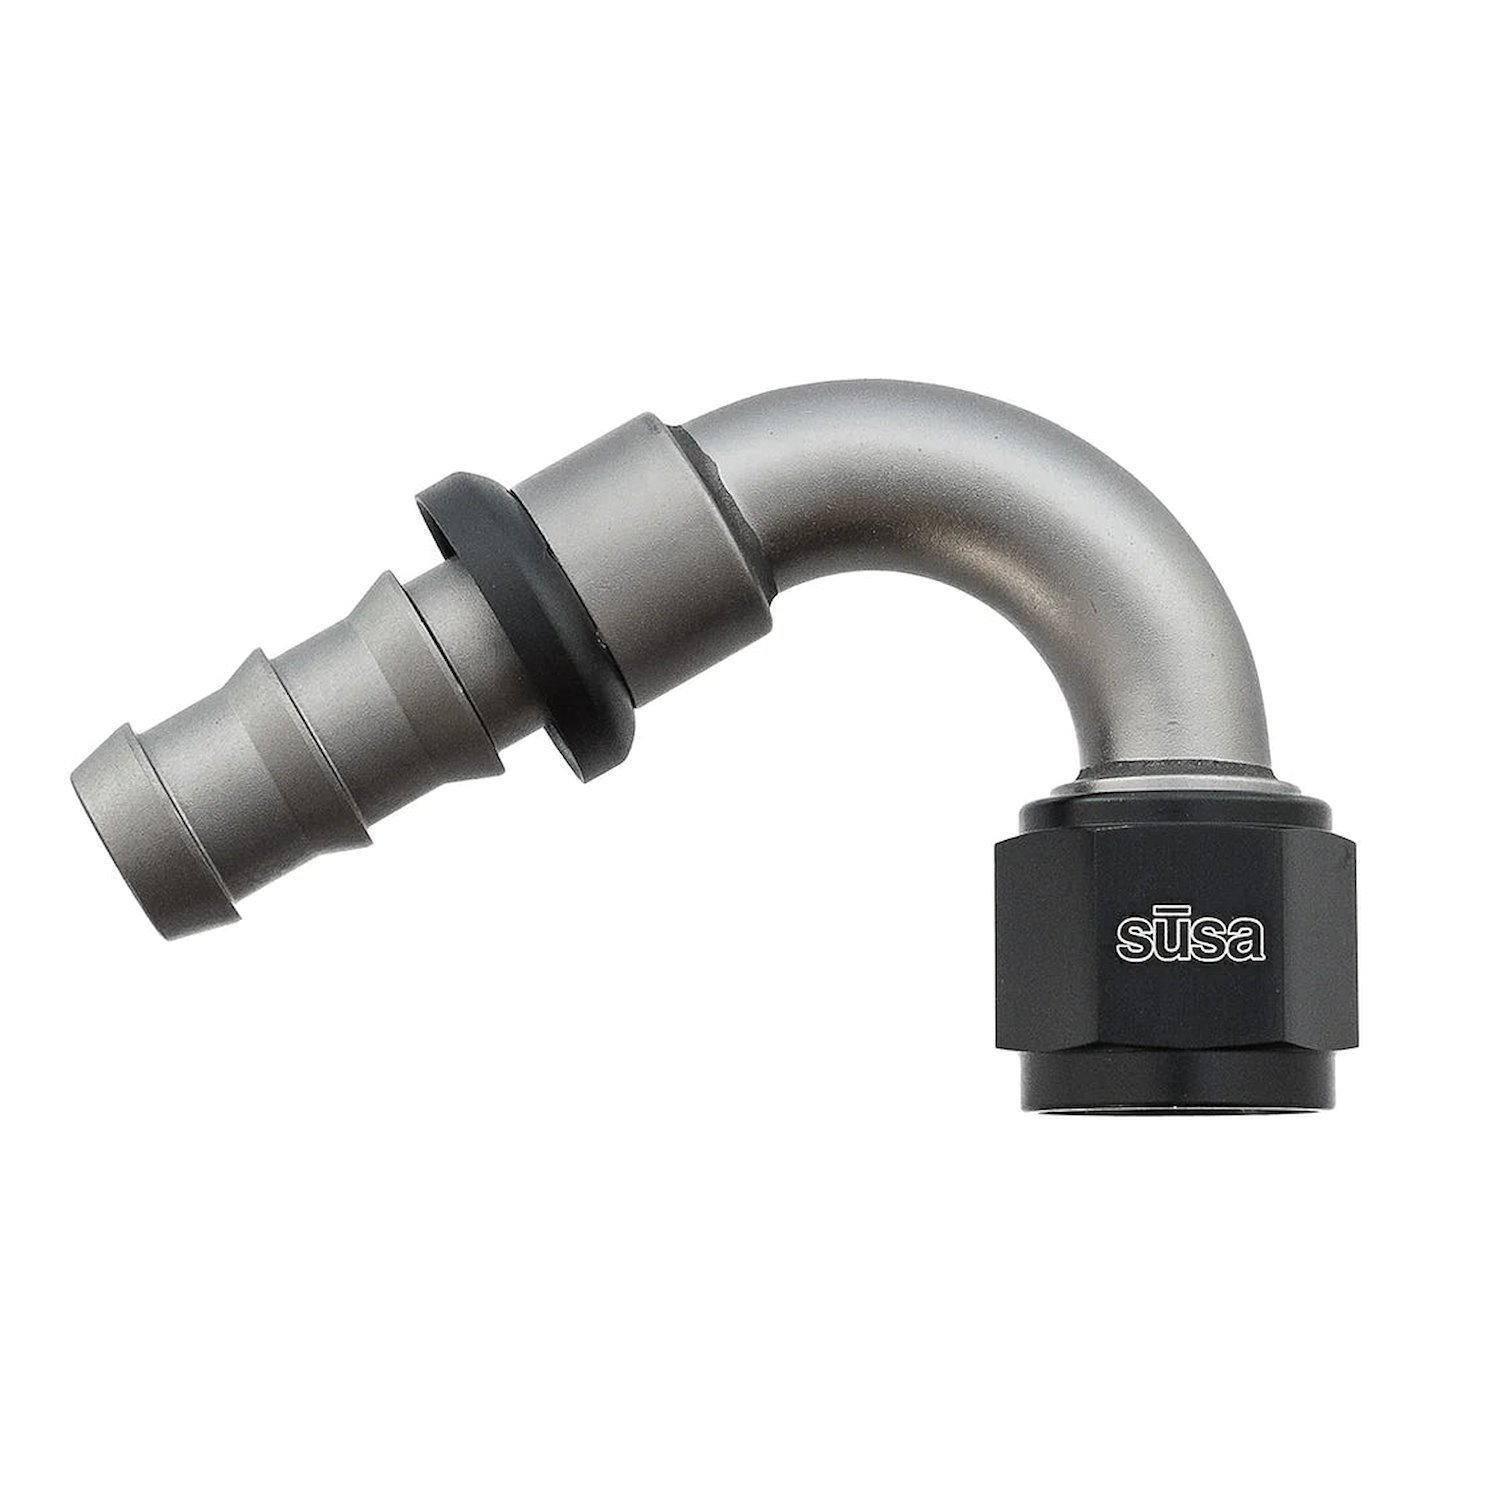 22-AN12PL12-120 Hose End, AN to PushLock Fitting, AN12 Female to -12 PushLock Male, 120-Degree